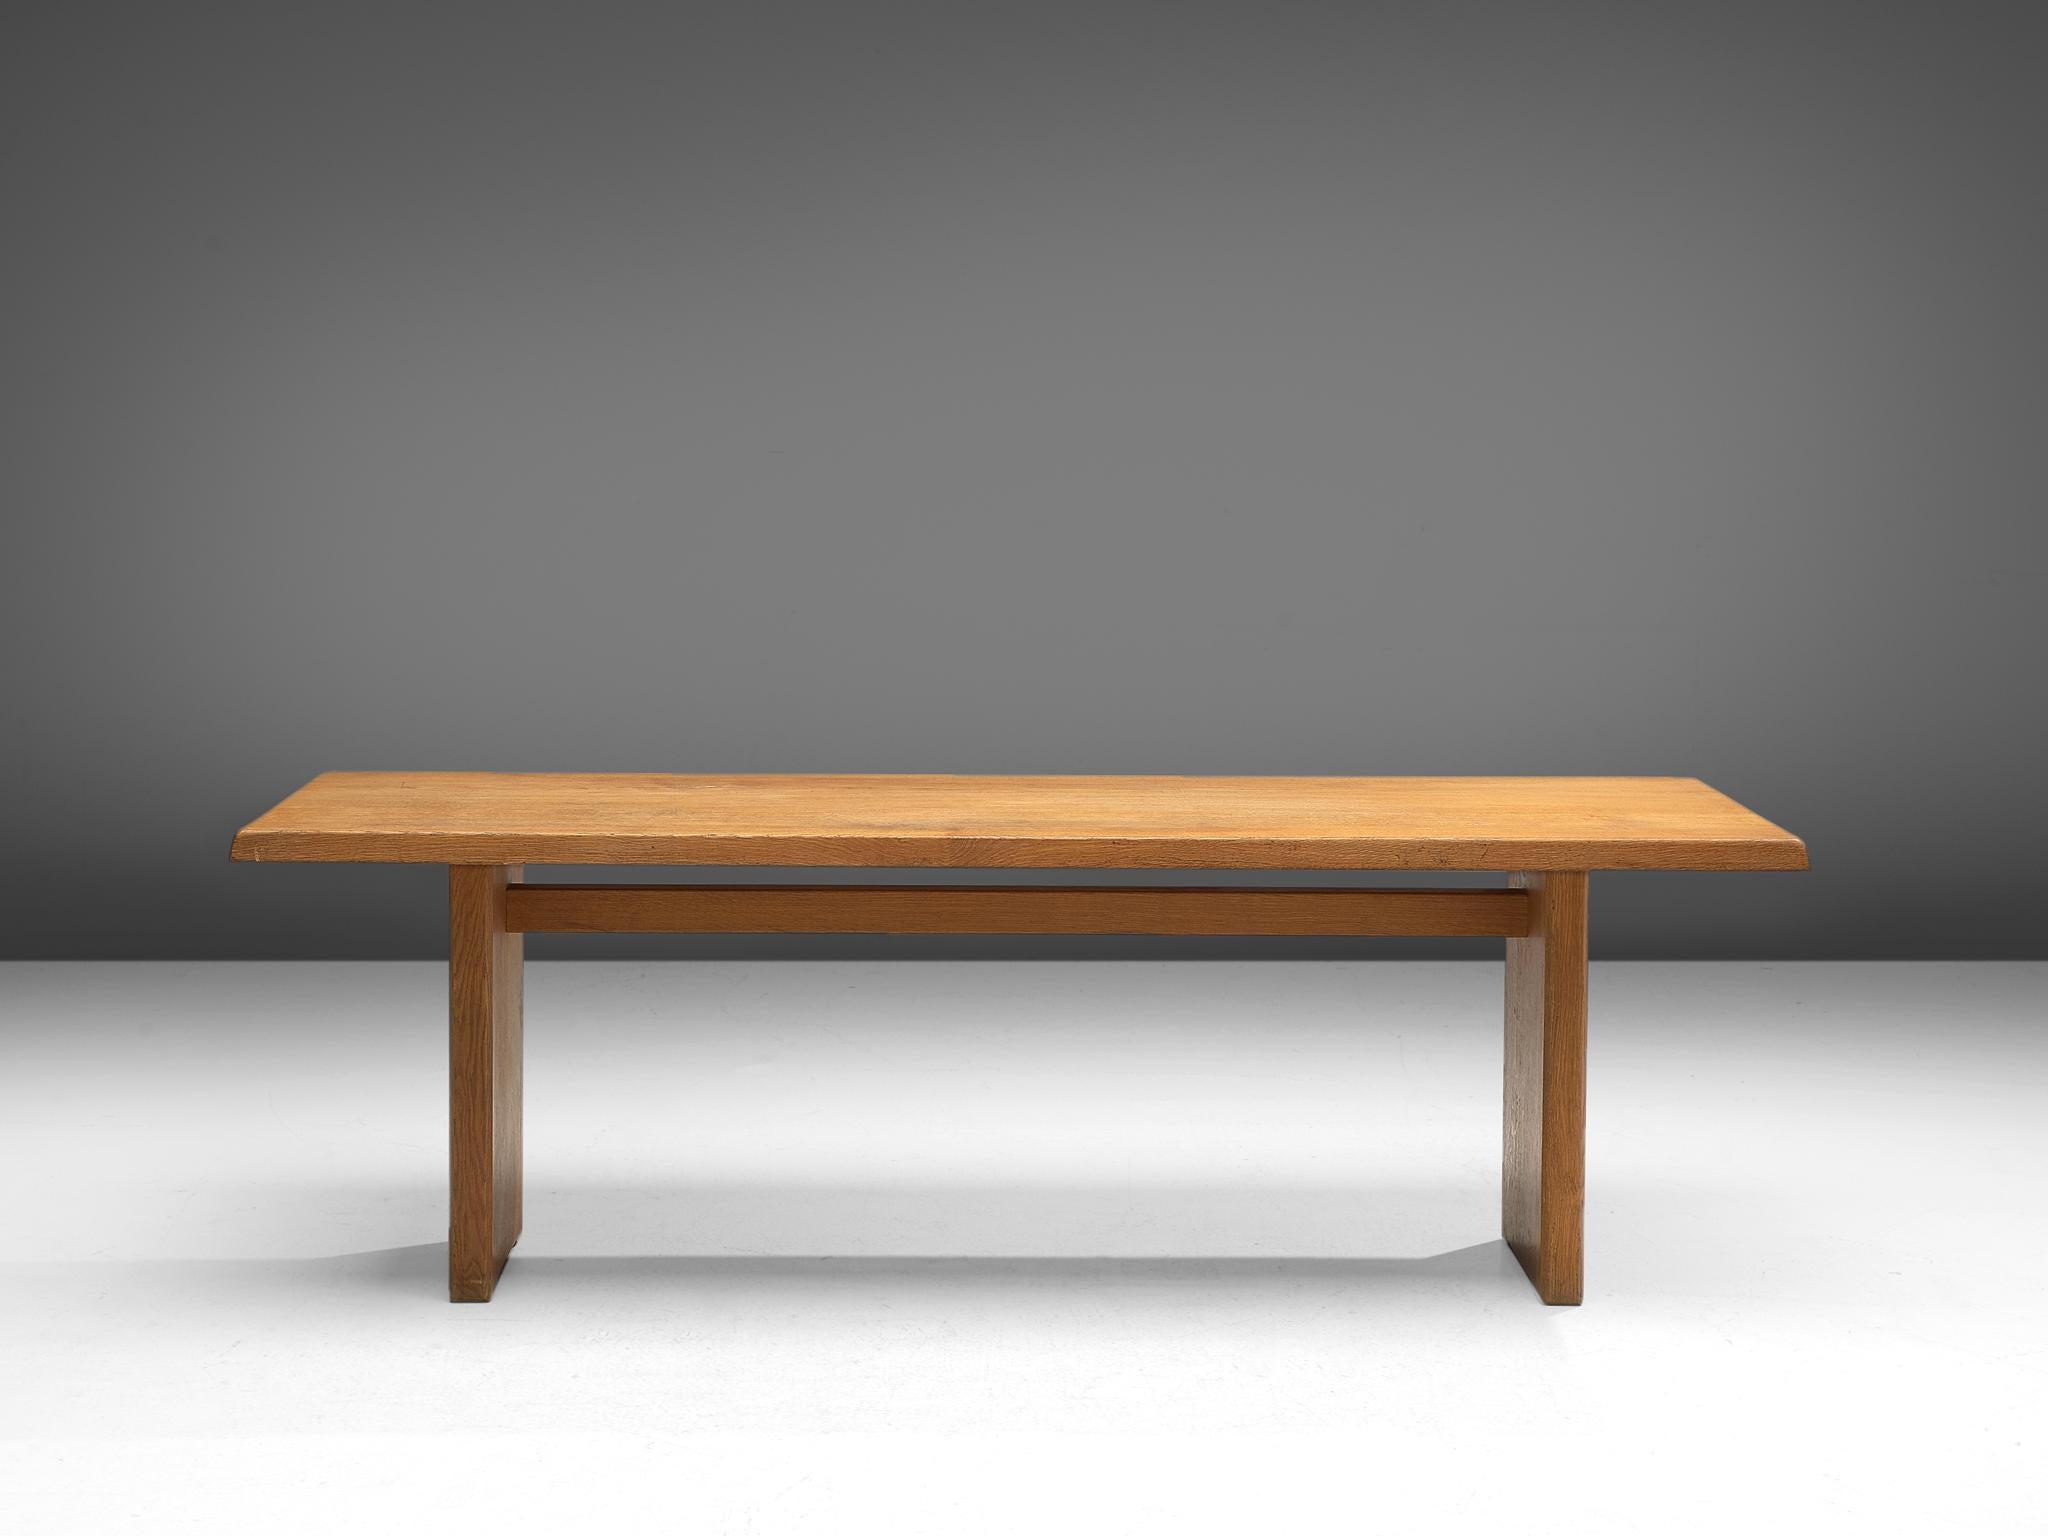 Pierre Chapo, dining table model T14D, oak, France, design 1960s, later production.

This dining table is designed by the French designer Pierre Chapo. The rectangular tabletop with sloping edges, rests on a two-legged base. Strong and simplified